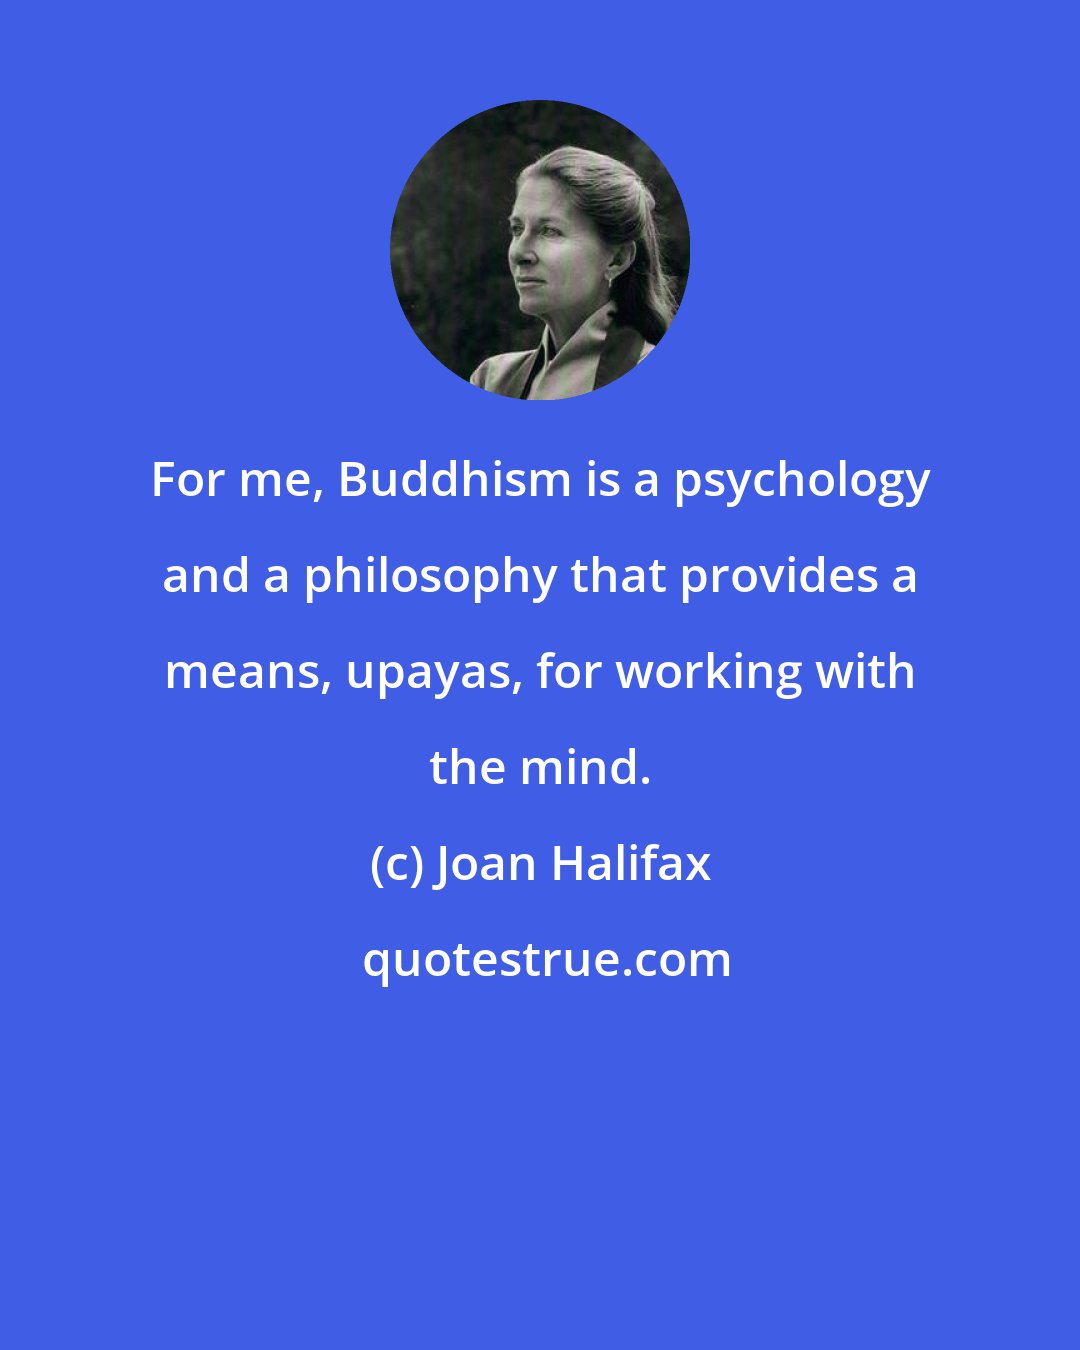 Joan Halifax: For me, Buddhism is a psychology and a philosophy that provides a means, upayas, for working with the mind.